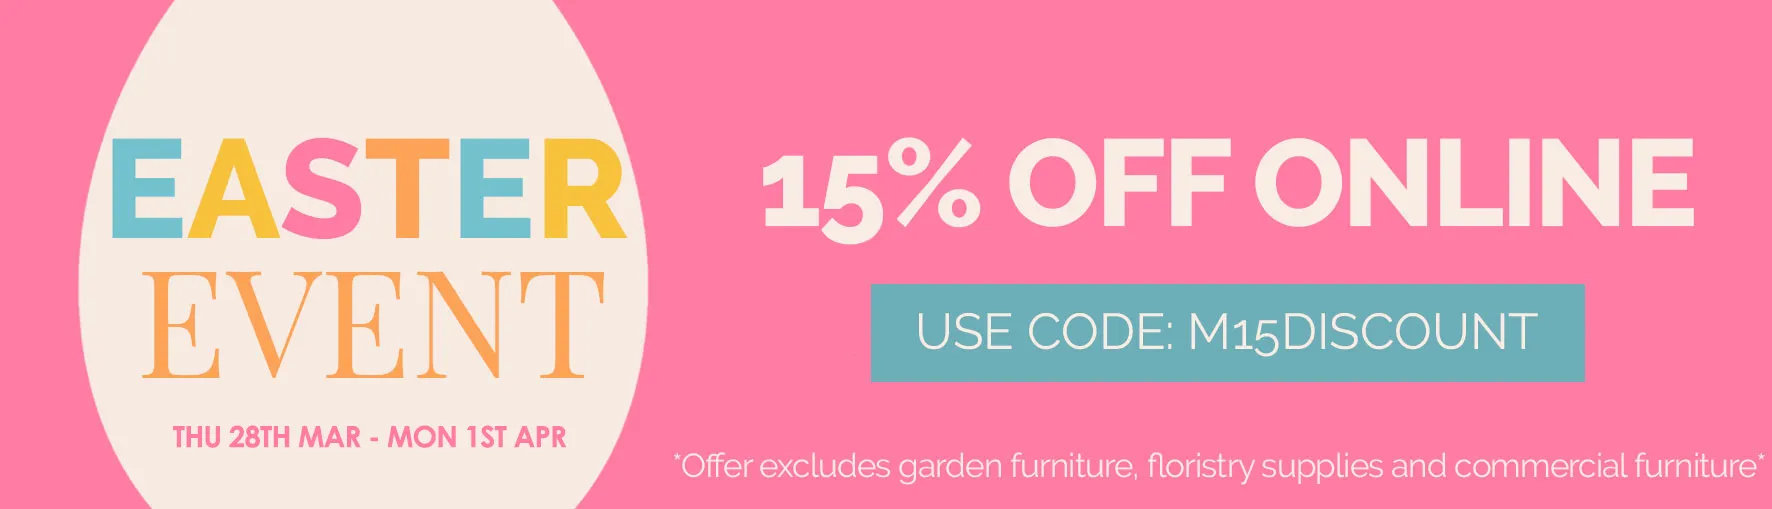 easter event sale 15% off online - use code M15DISCOUNT - 28th March til 1st April - excludes garden furniture, floristy supplies and commercial furniture